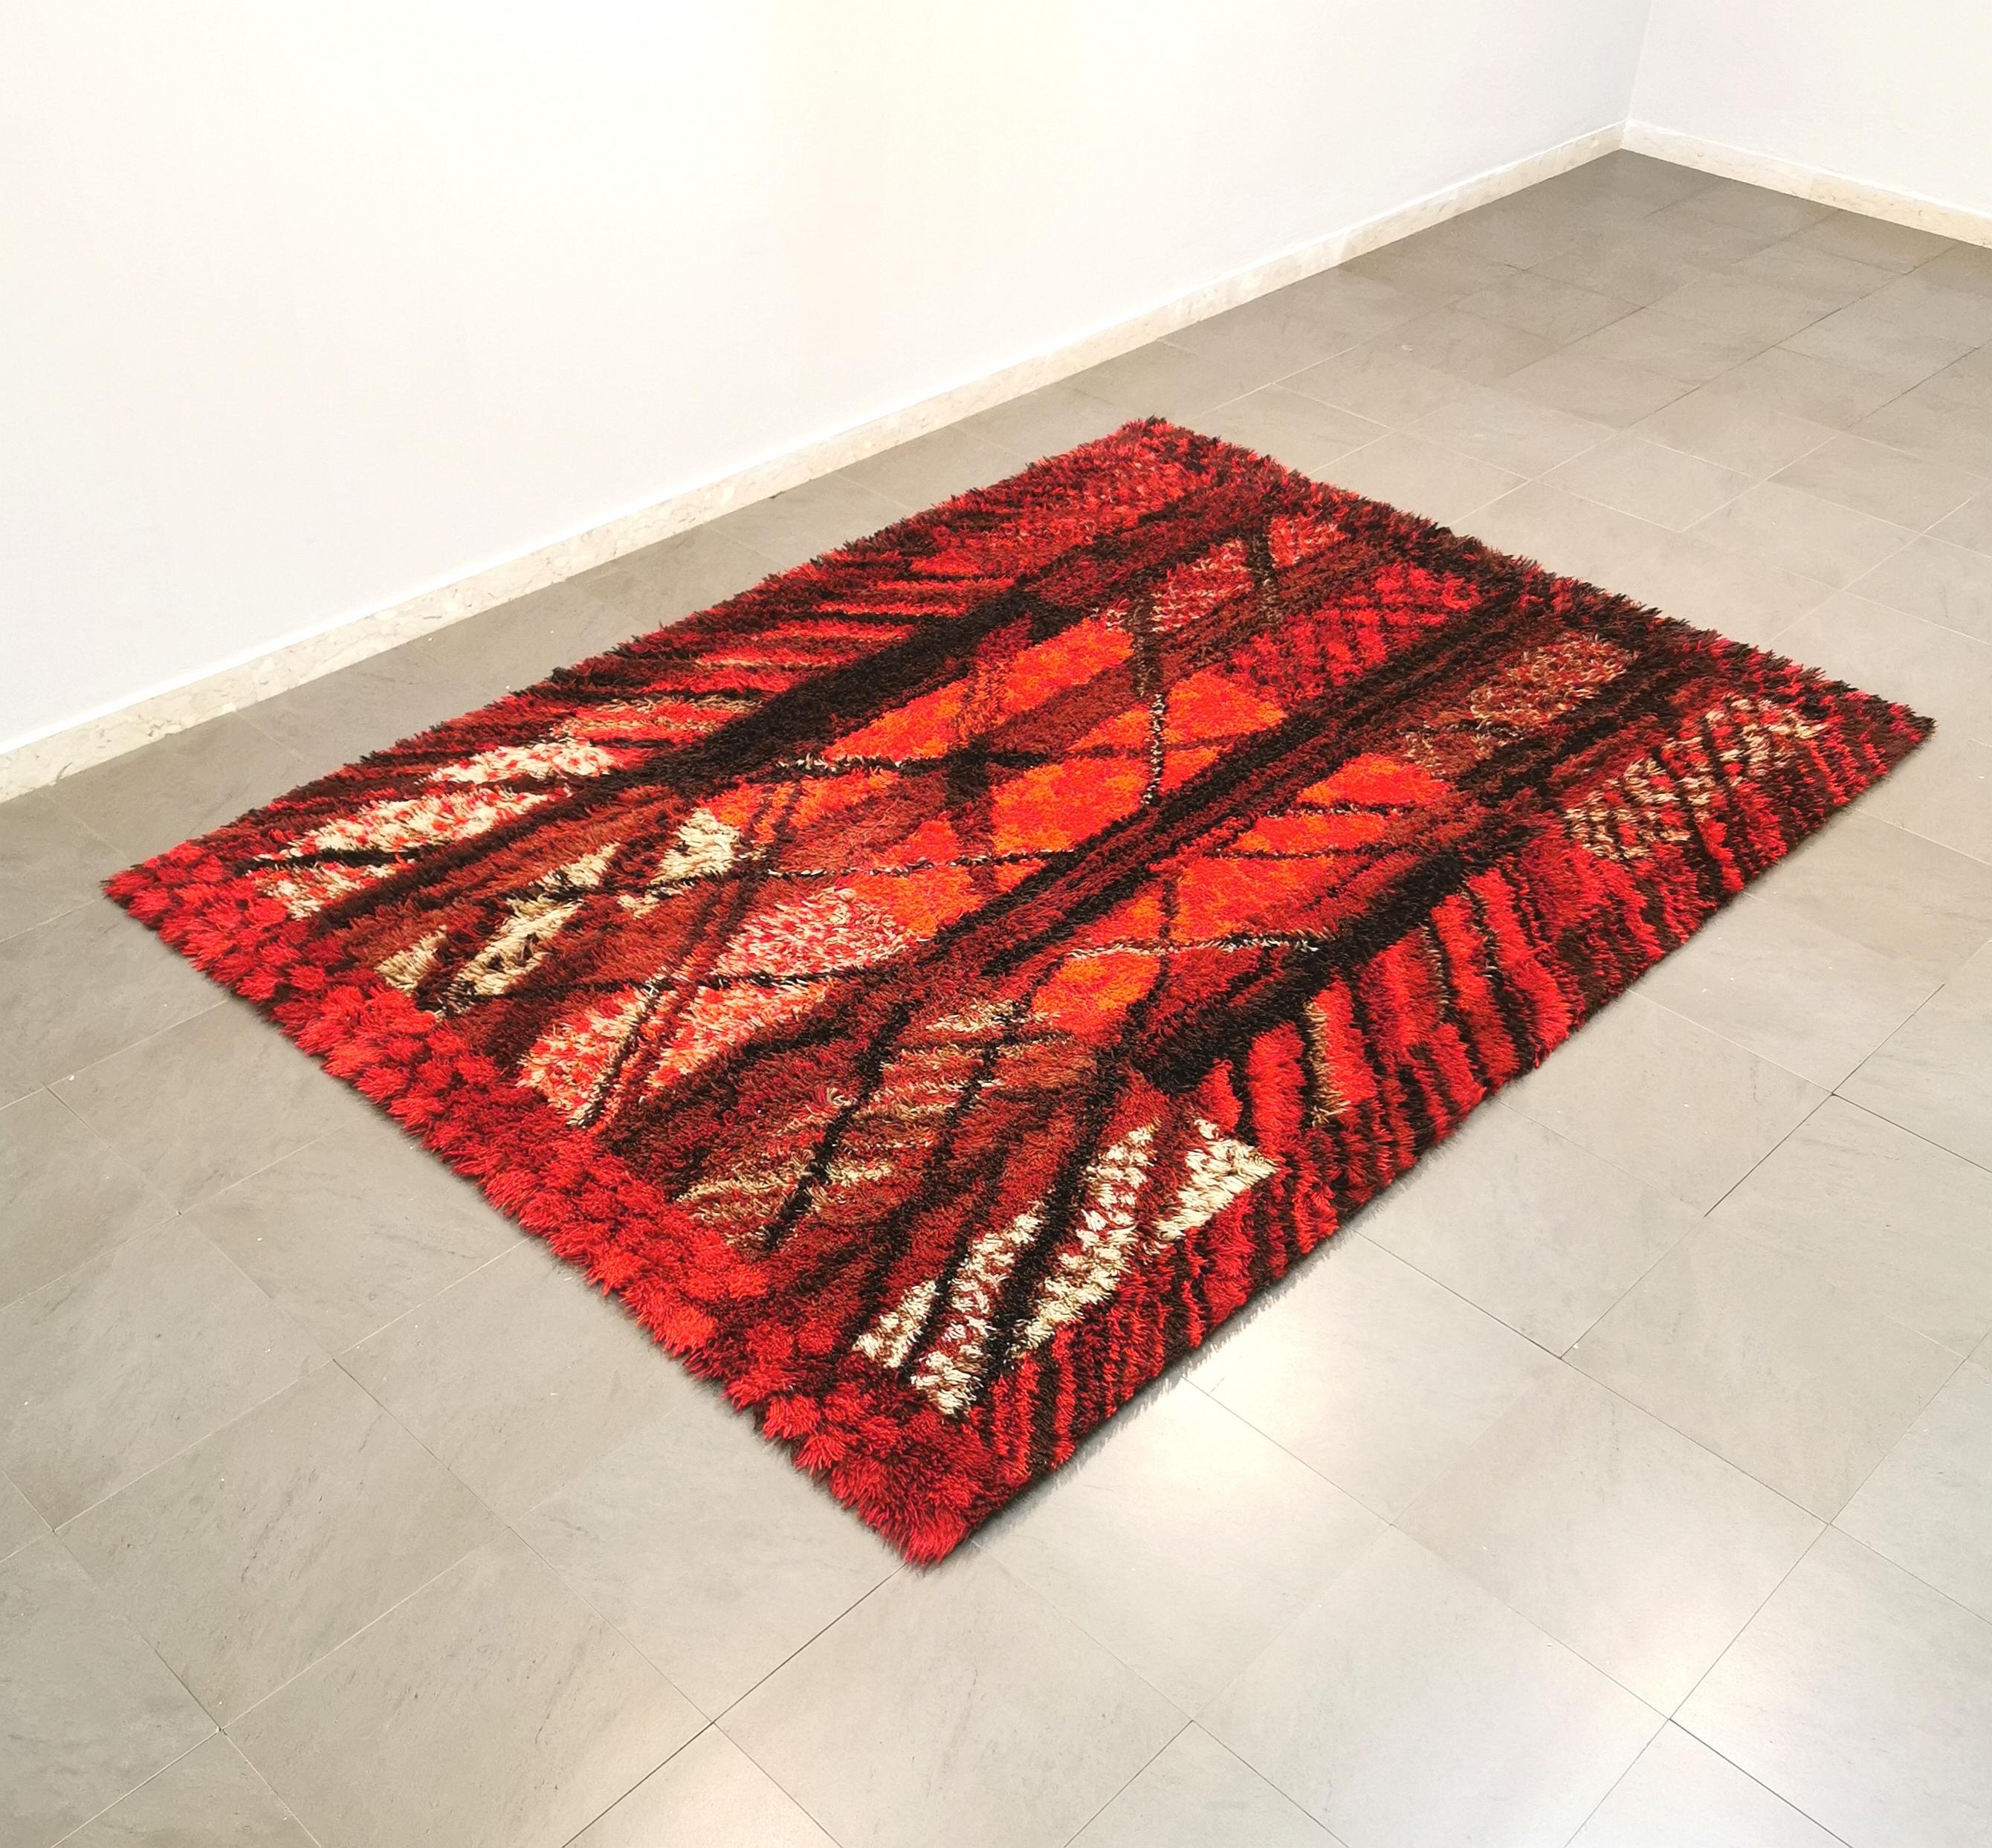 Rya rectangular rug designed by the Swedish designer Marianne Richter and produced by the AB Wahlbecks factory in Sweden in the 1960s. This carpet model called 